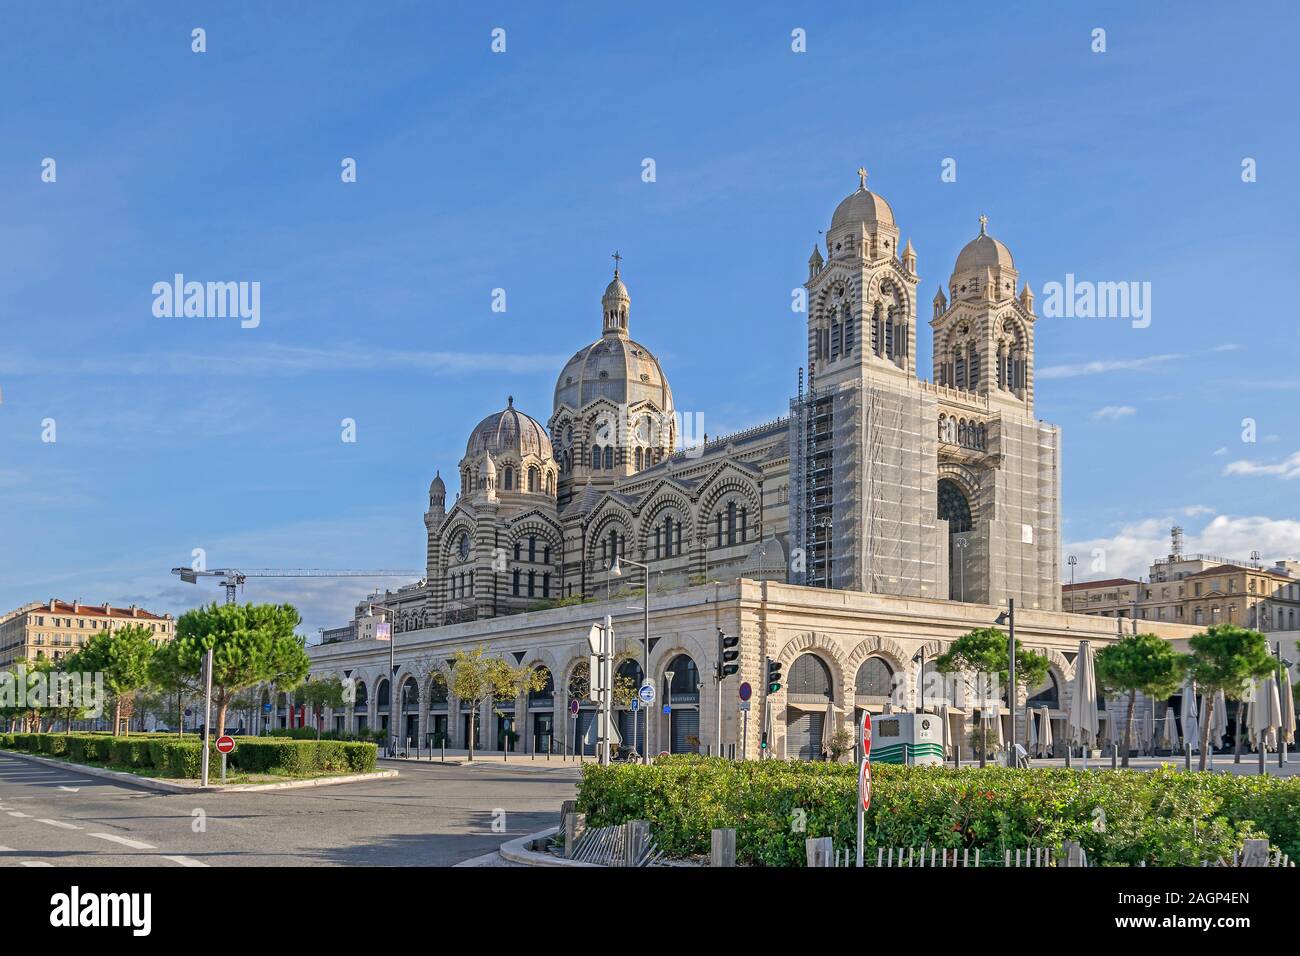 Marseille, France - November 1, 2019: Boulevard Jacques Saade with shops and restaurants and the new Cathedral of Saint Mary Major, the seat of the Ar Stock Photo